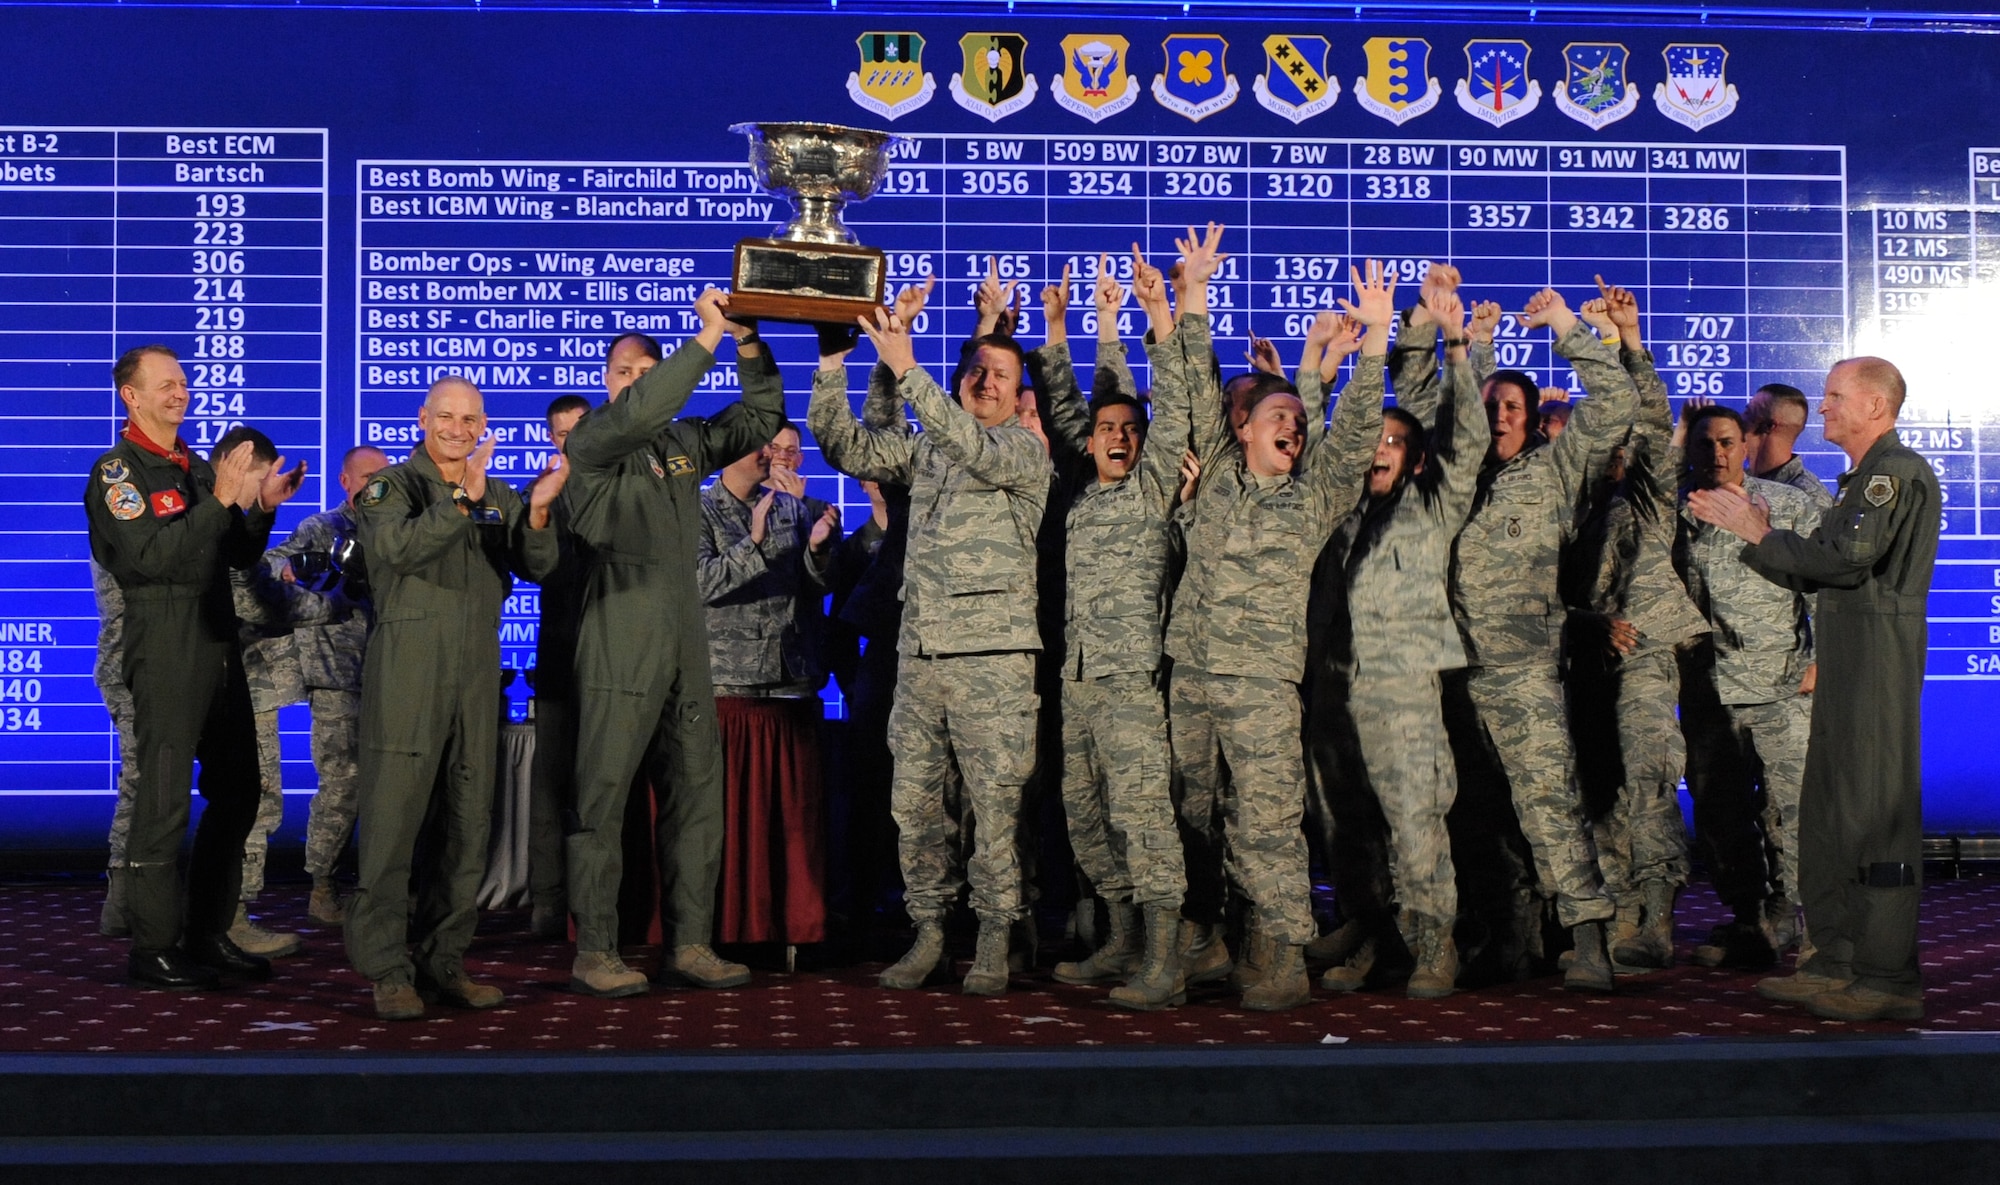 BARKSDALE AFB, La. - The 28th Bomb Wing from Ellsworth AFB, S.D., was awarded the Fairchild Trophy for Best Bomb Wing during the second night of the Global Strike Challenge score posting at Barksdale Air Force Base, La., Nov. 9. Global Strike Challenge is an amalgam of the best of the historic bomb competition and the former missile competition held under previous major commands that owned the missile and bomber missions at the time. Global Strike Challenge is unique when compared to those competitions because it includes operations, maintenance and security force participants from both the missile and bomber communities under the 2-year-old Air Force Global Strike Command. It also welcomes teams and weapon systems from other major commands. (U.S. Air Force photo by Airman 1st Class Micaiah Anthony) 